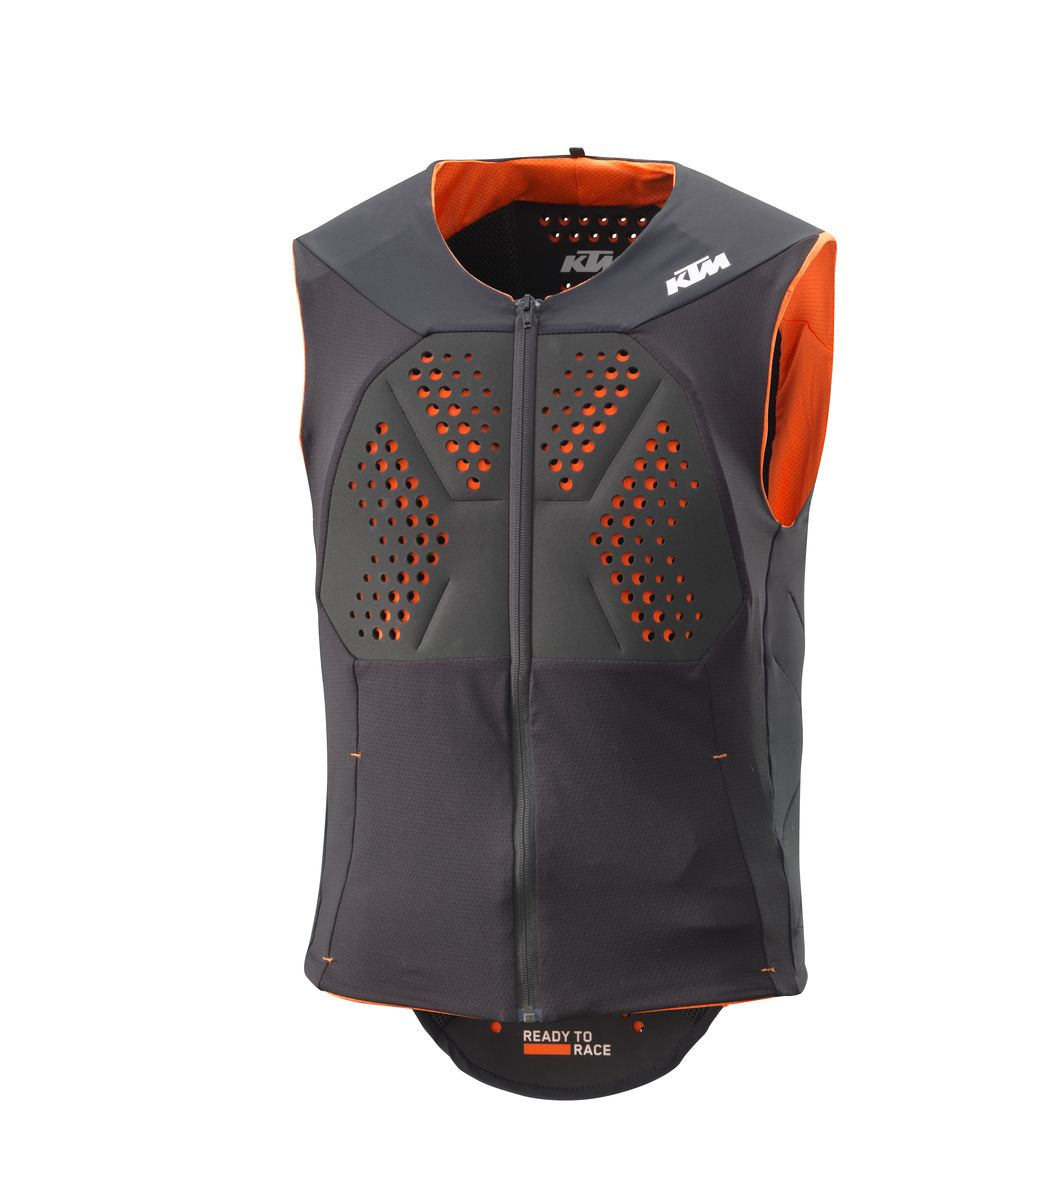 COUDIERES MOTO ENFANT KTM BIONIC PLUS YOUTH ELBOW PROTECTOR BY  ALPINESTARS SIZE_POWERWEAR S/M